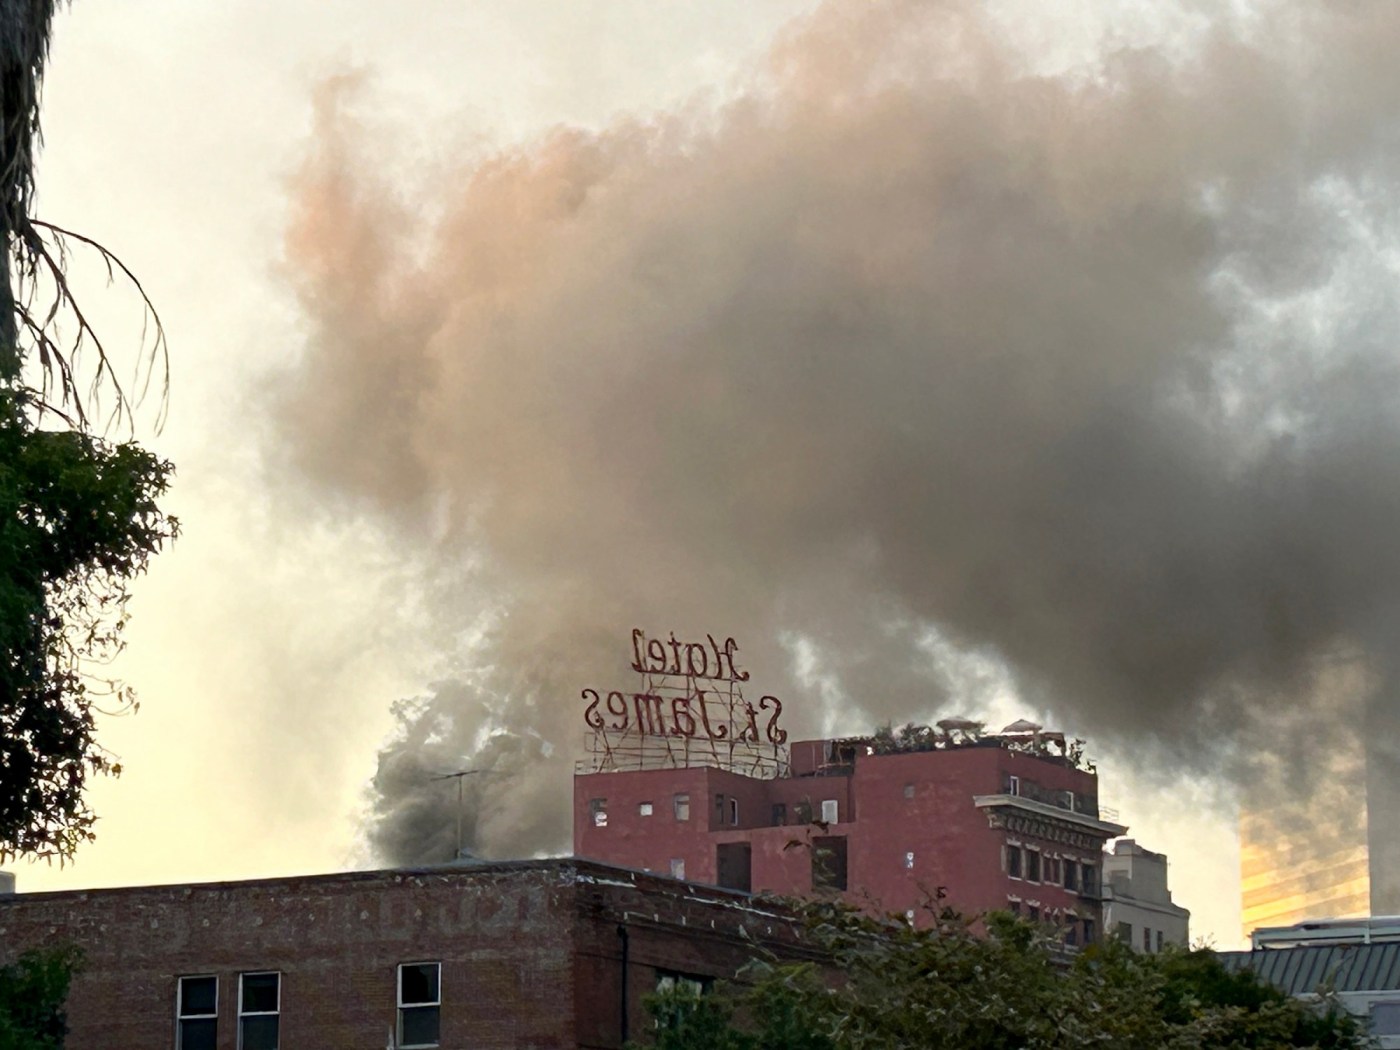 roof-fire-on-three-story-downtown-san-diego-building-prompts-evacuations